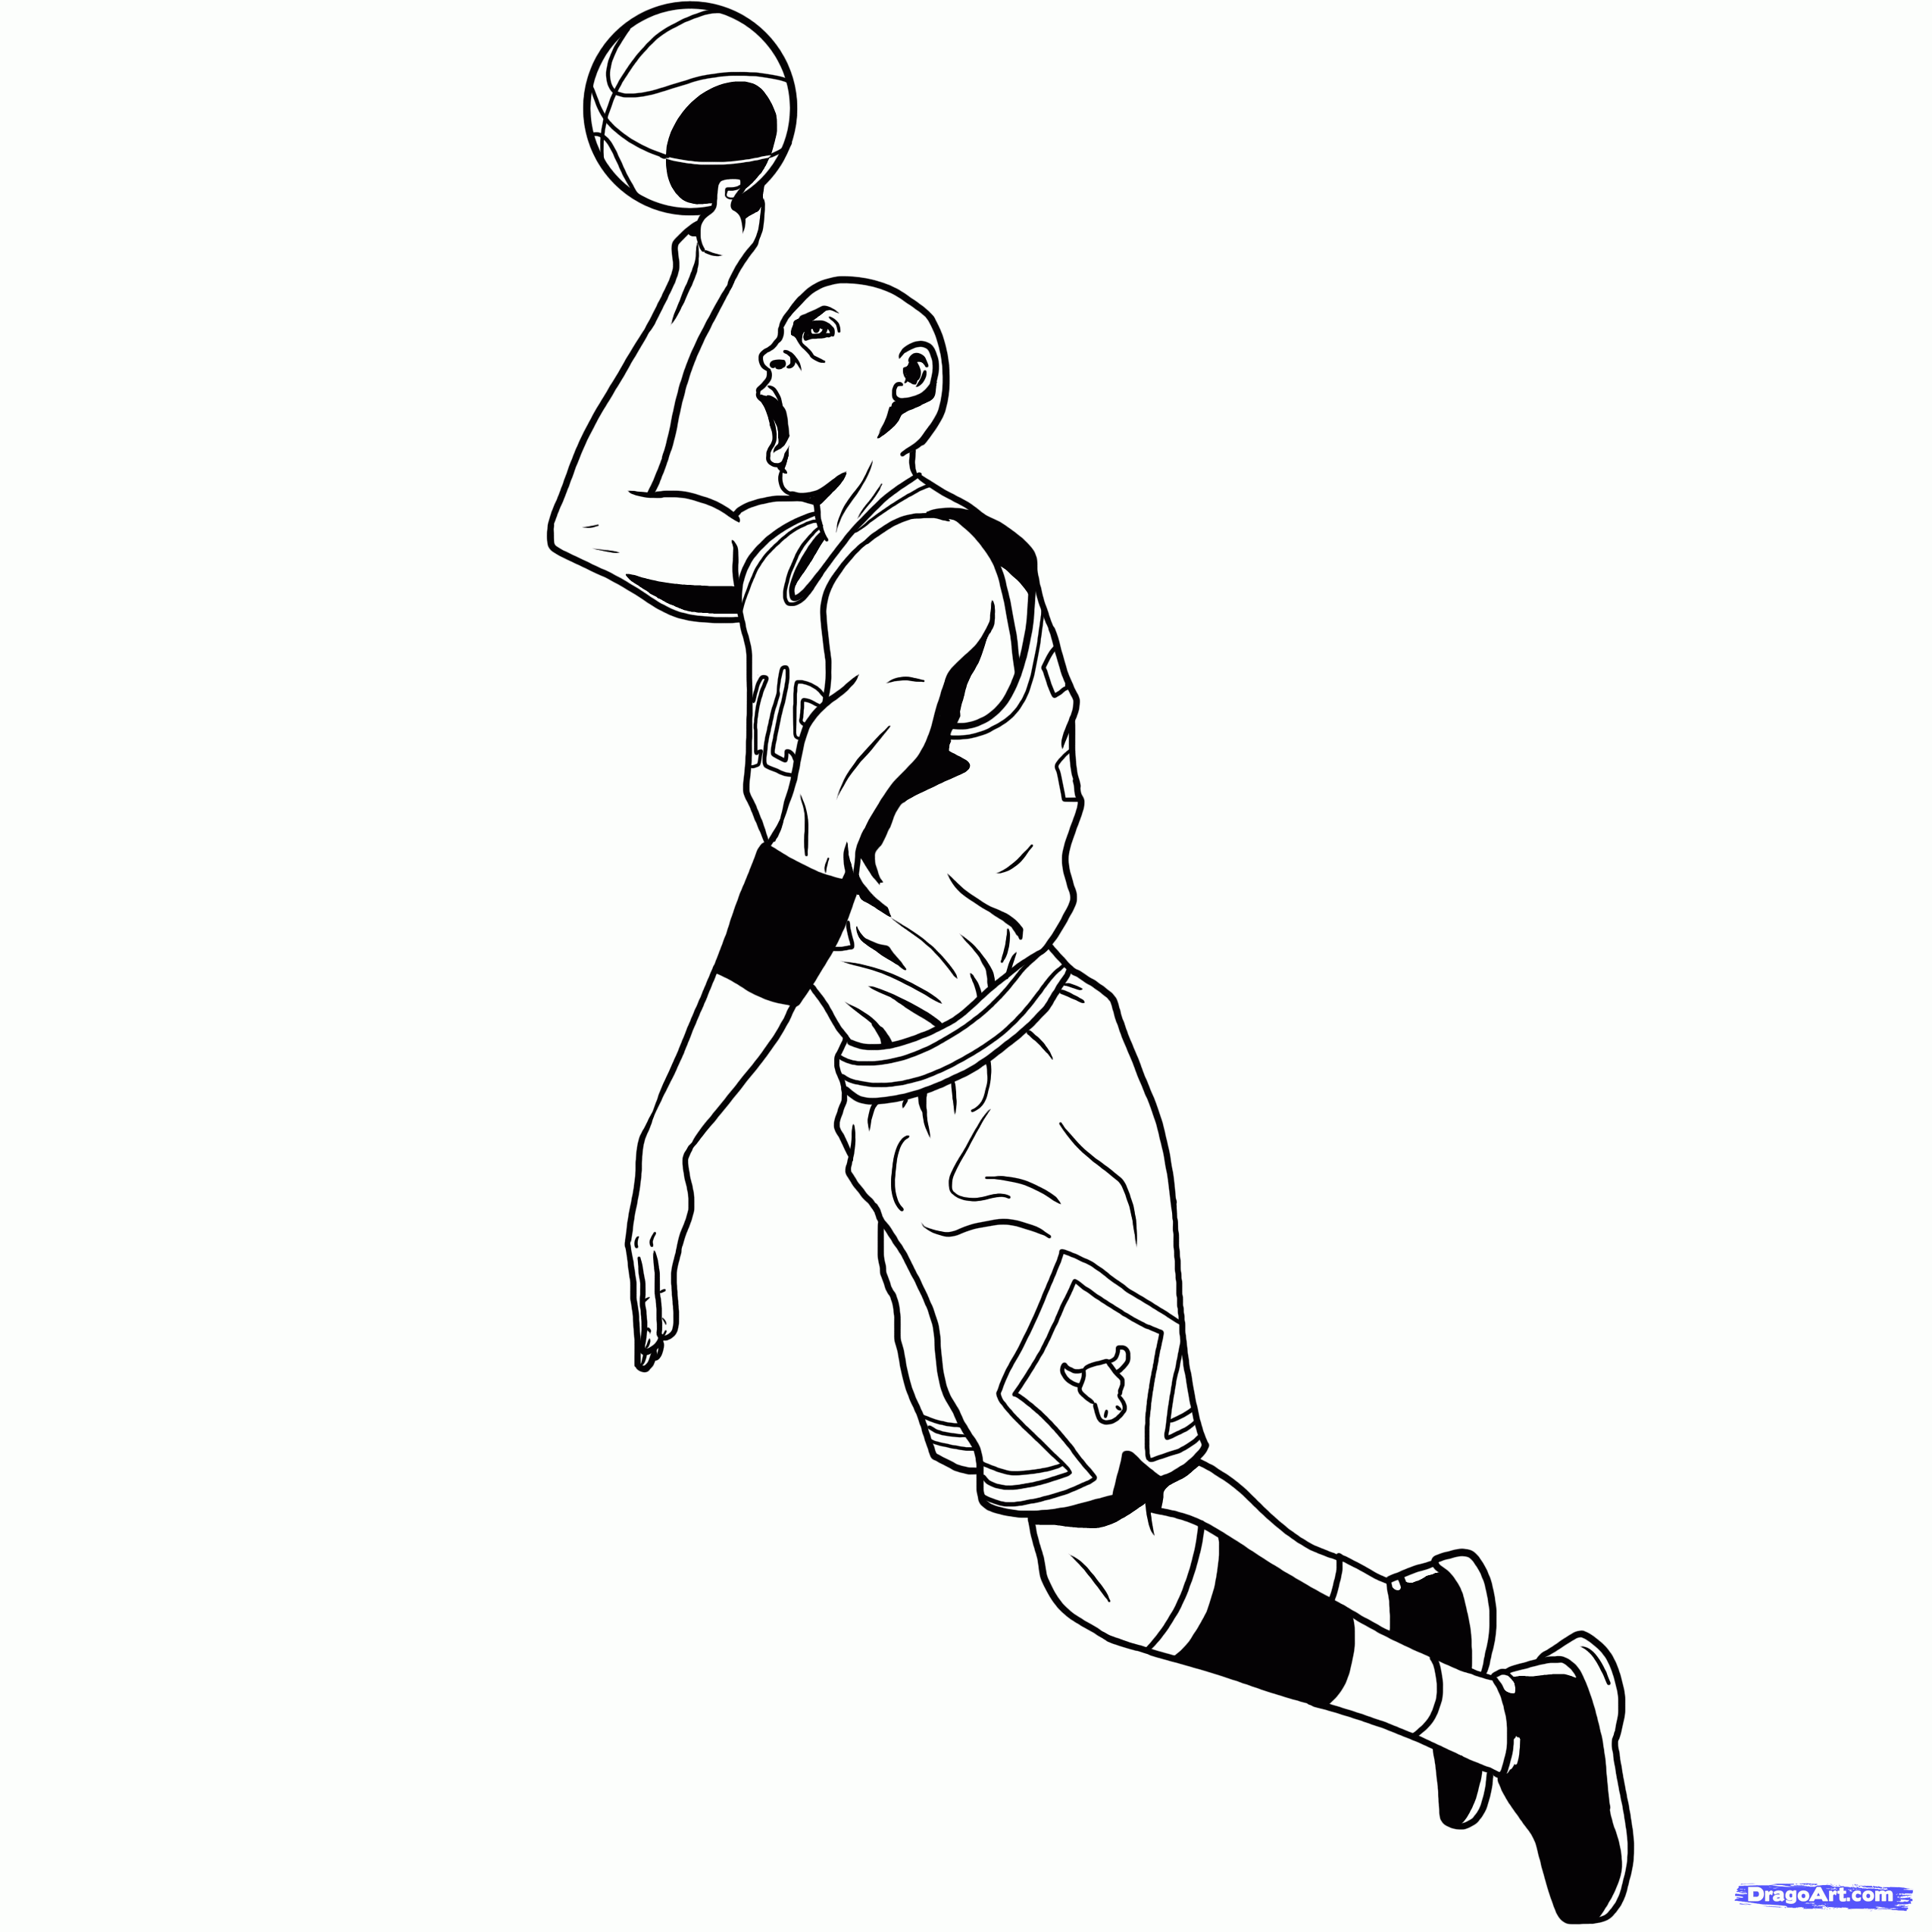 How To Draw Michael Jordan Dunk Drawing Sketch Coloring Page